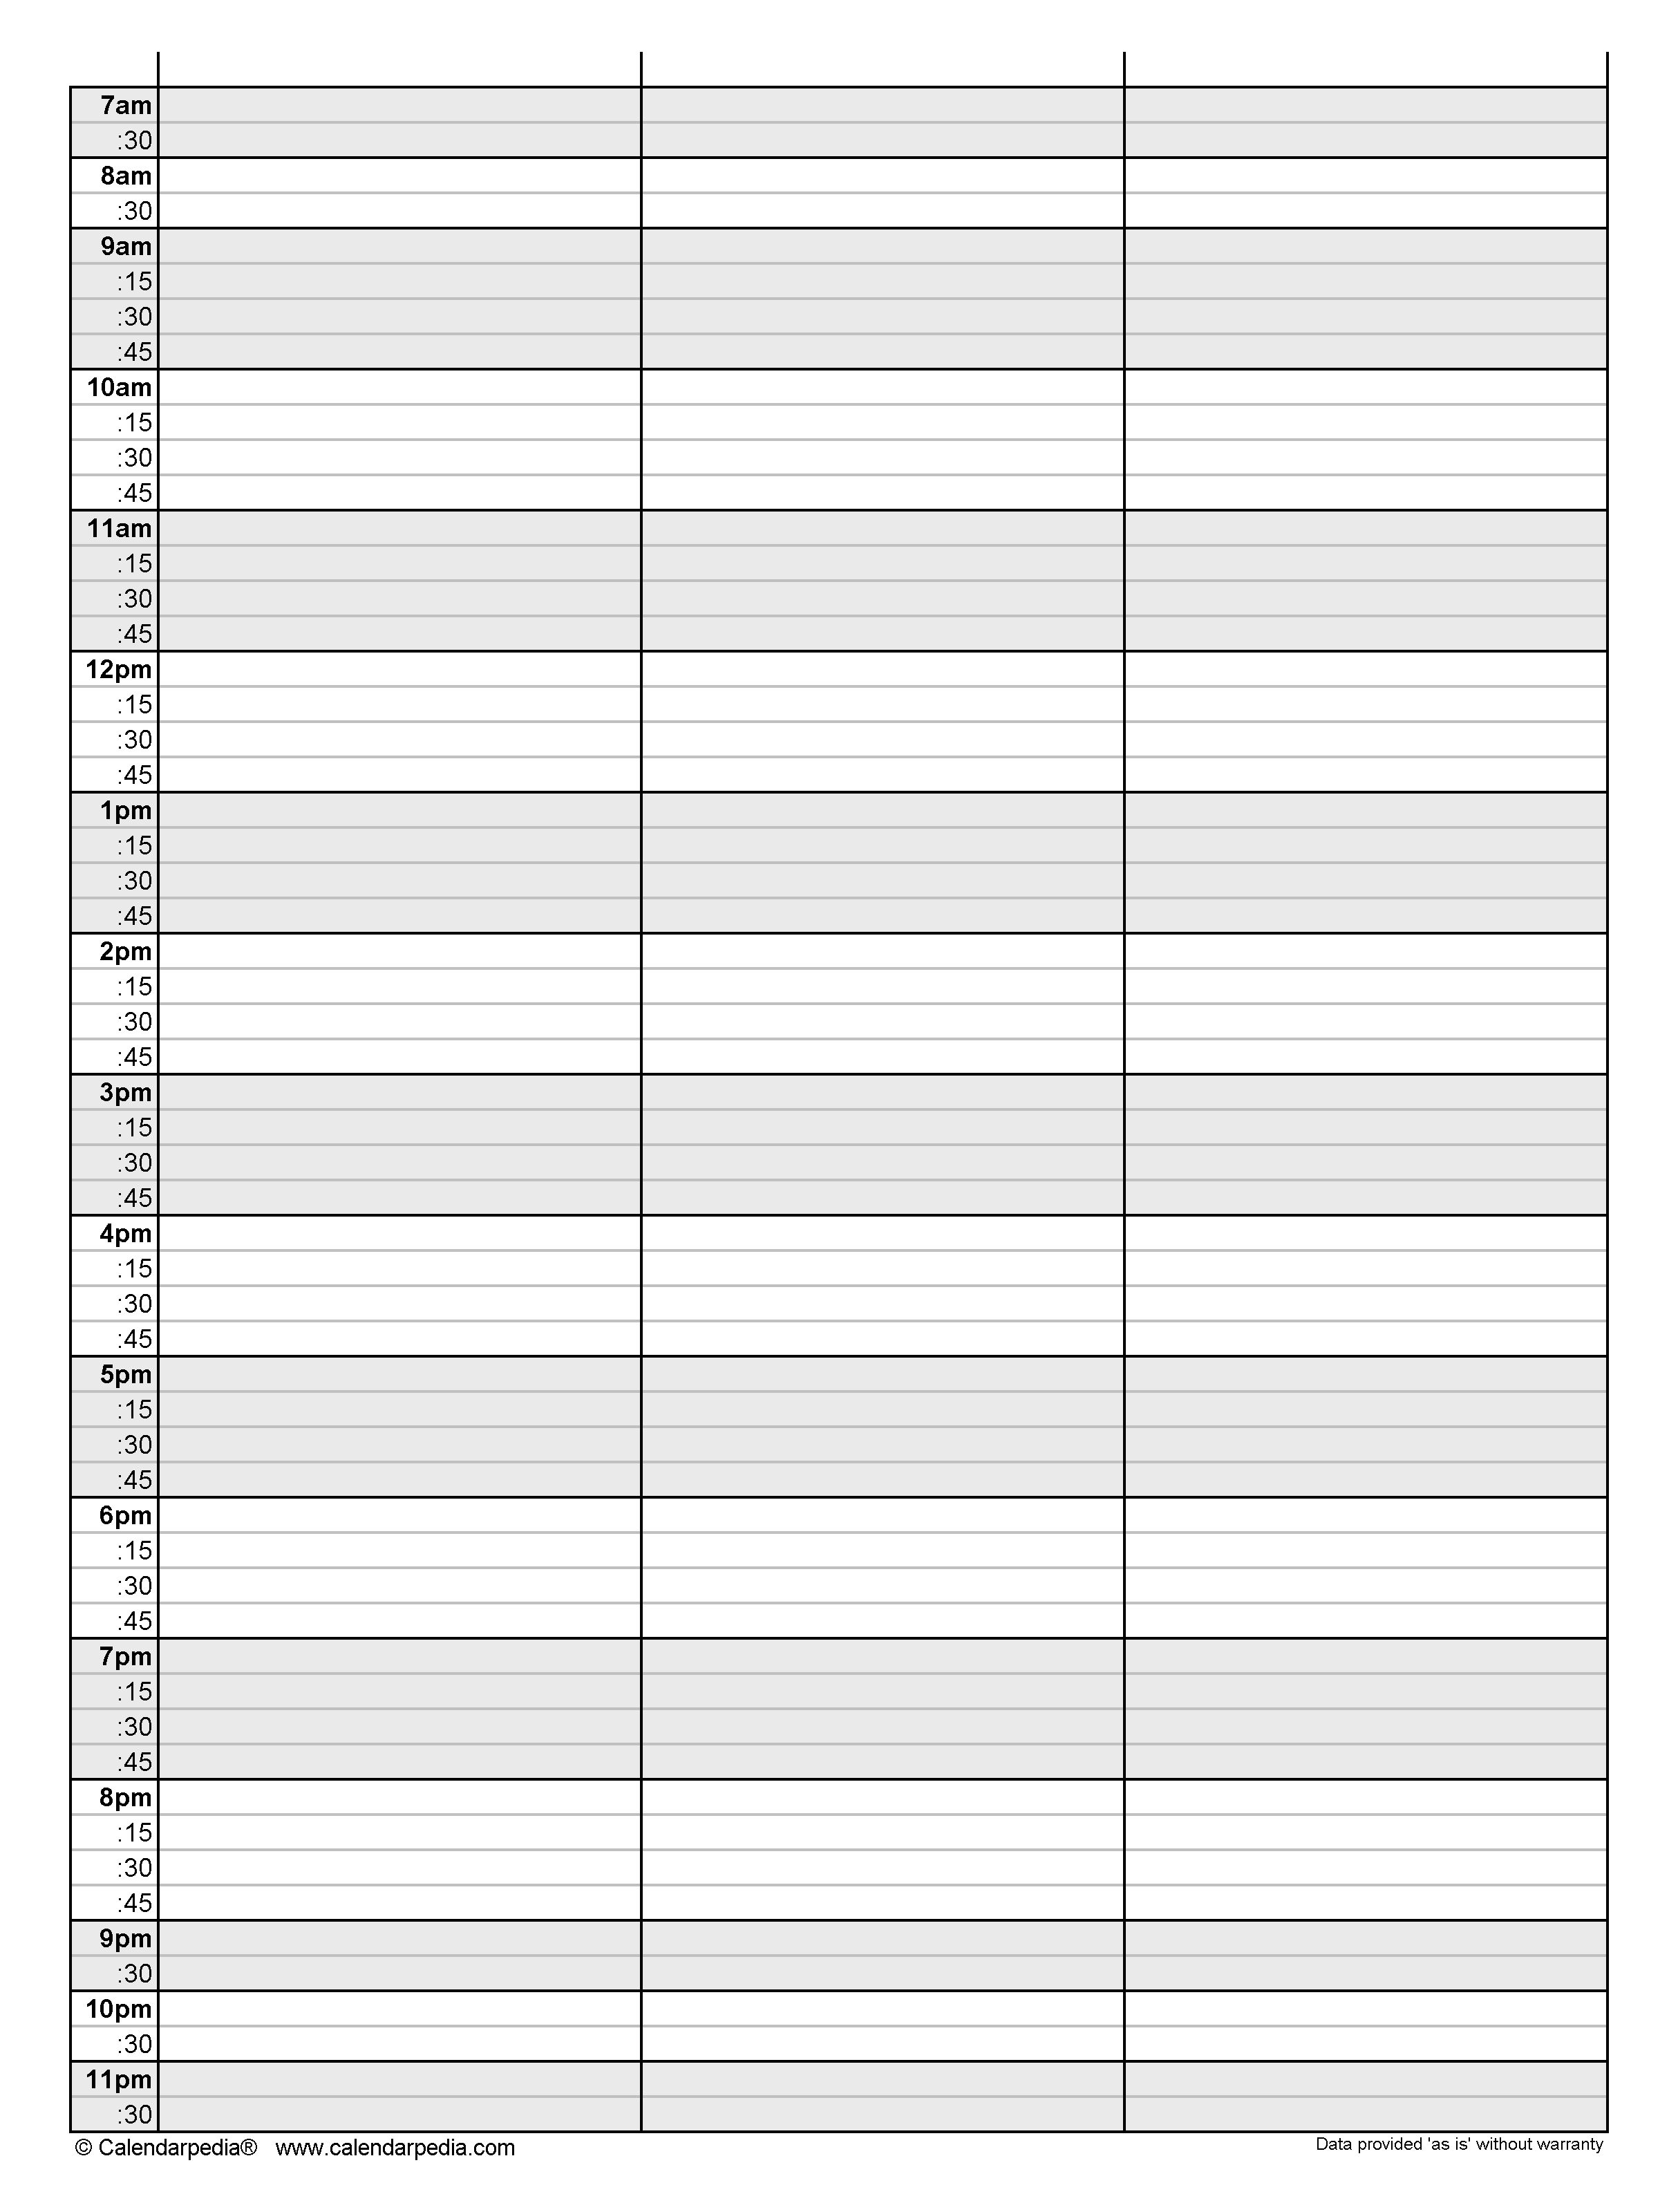 Free Daily Schedules in PDF Format - 10+ Templates With Printable Blank Daily Schedule Template